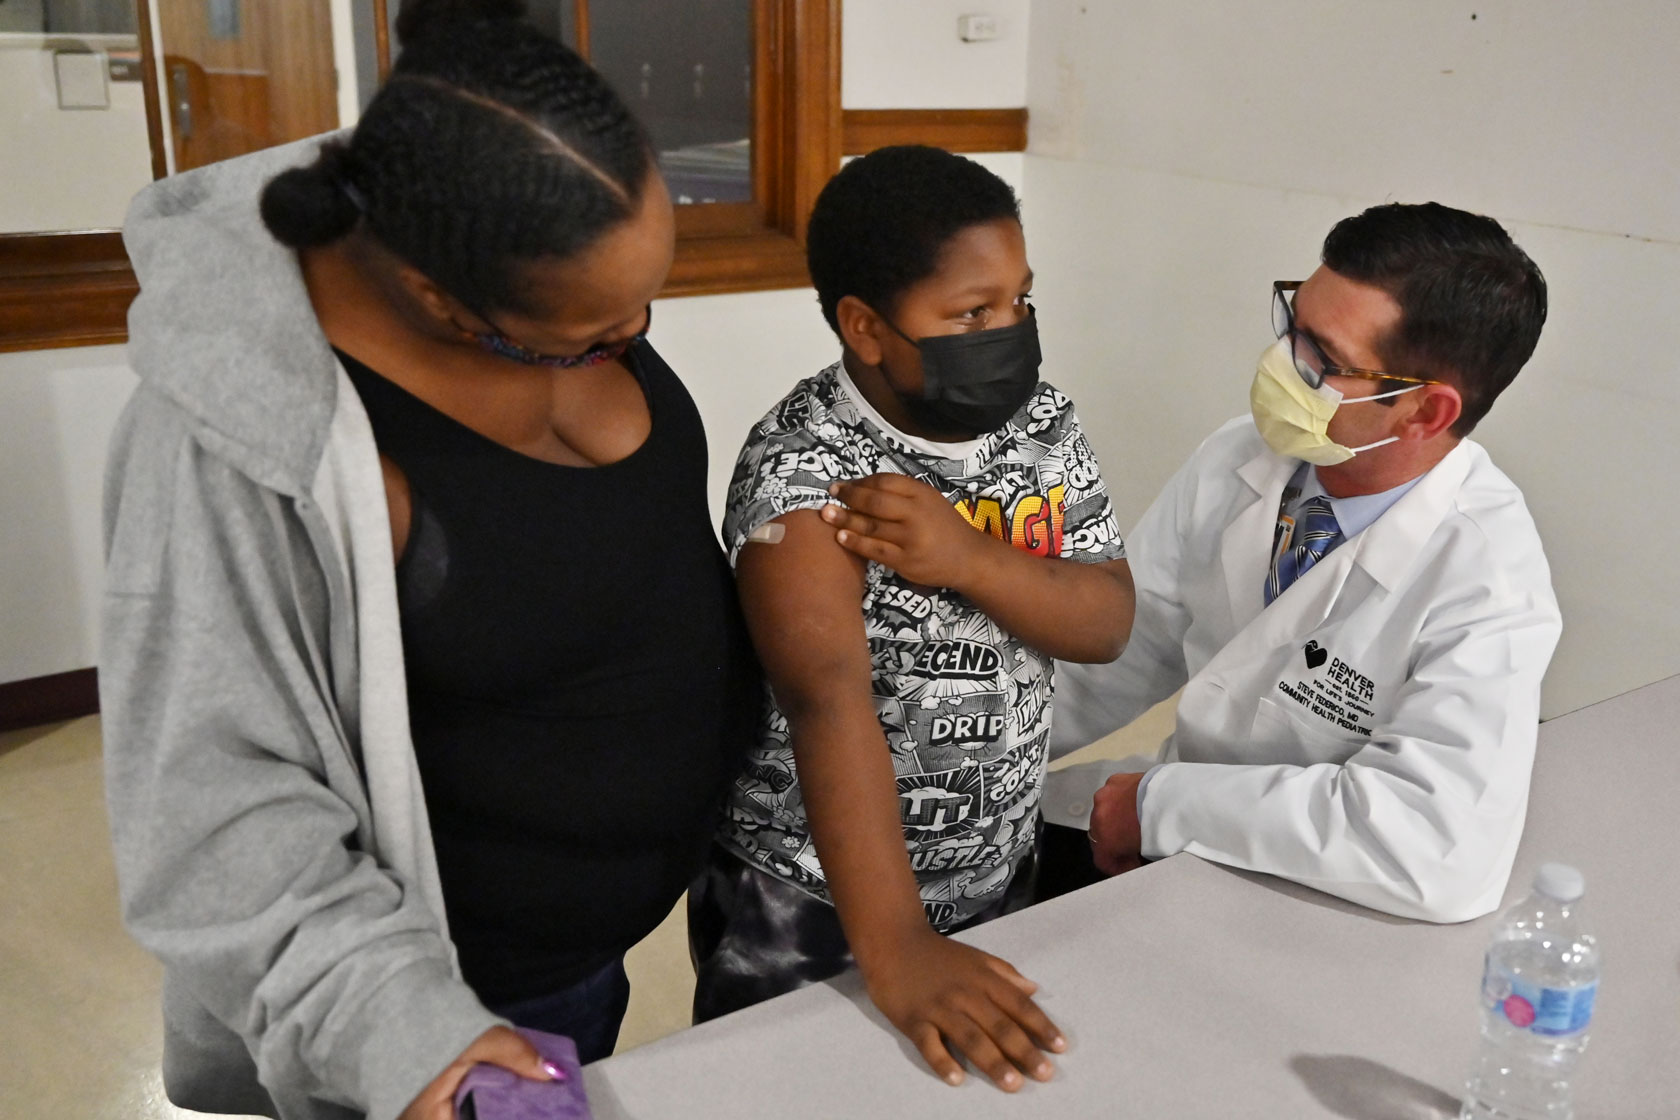 A doctor, right, comforts an 8-year-old boy after his first vaccine shot as his mother looks on at a clinic in Denver.